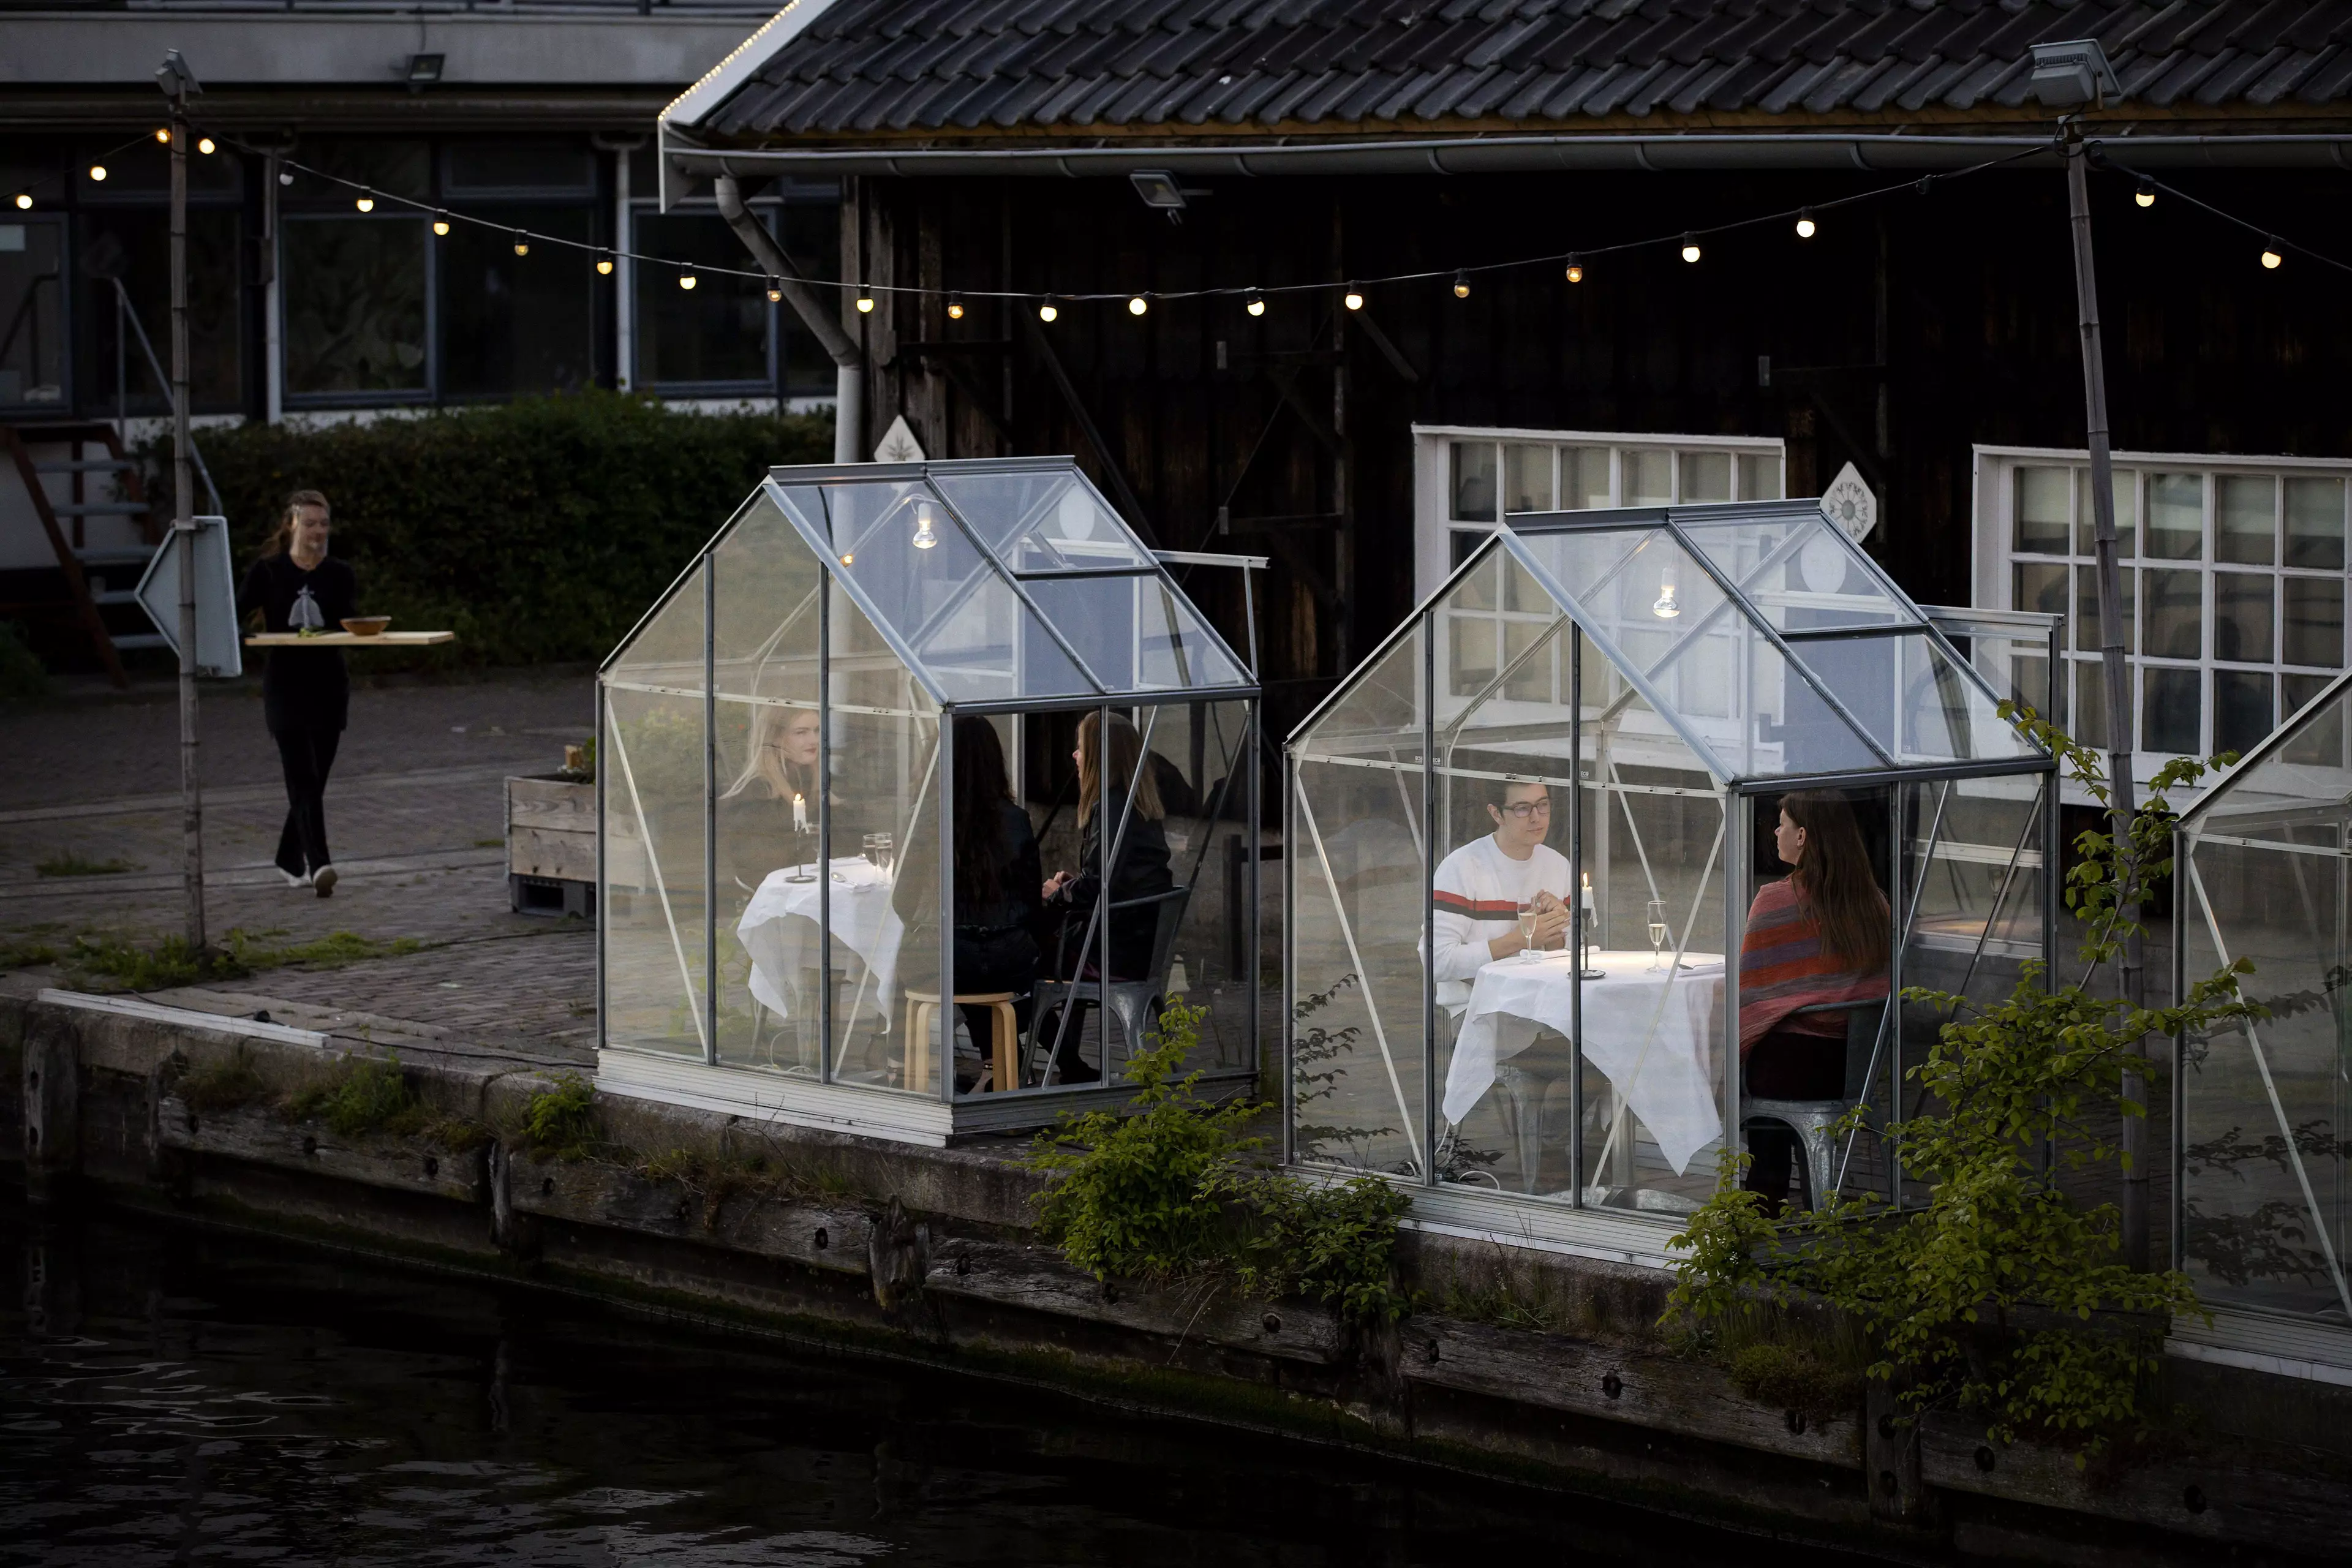 A restaurant in Amsterdam has installed greenhouses for diners.